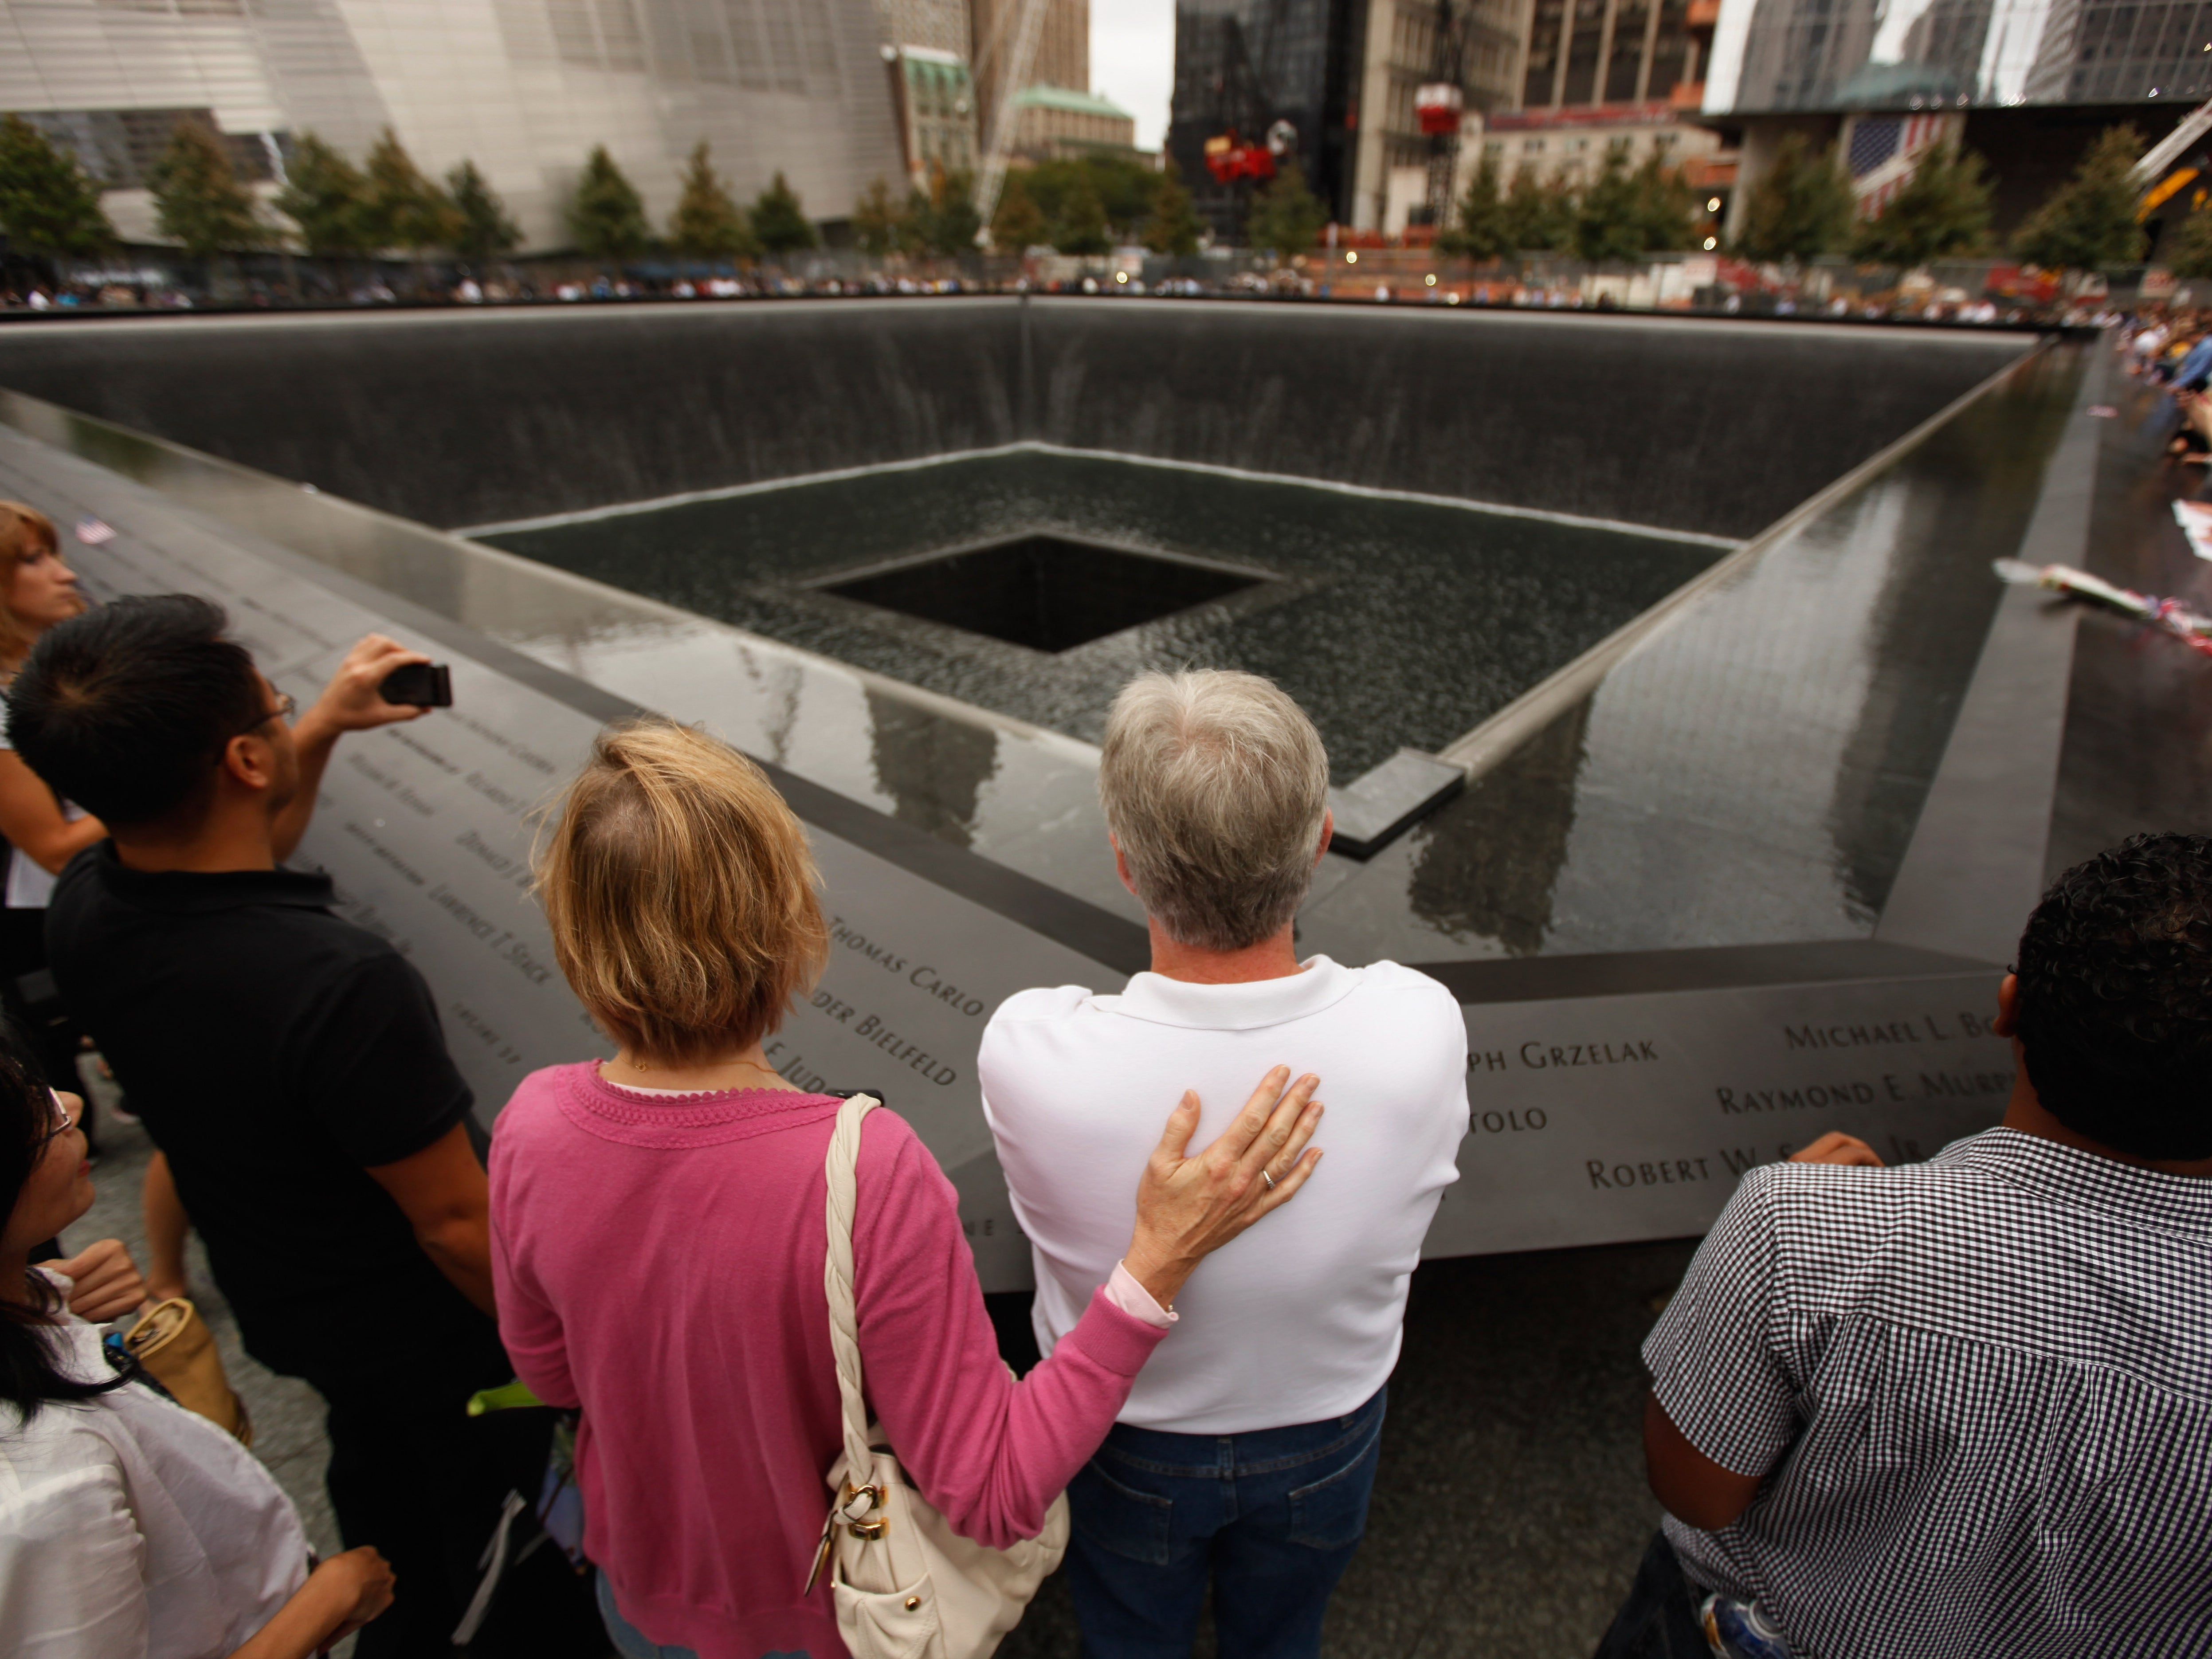 Family members of 9/11 victims stand at the edge of one of the memorial pools in New York City on the attack’s 10th anniversary in 2011